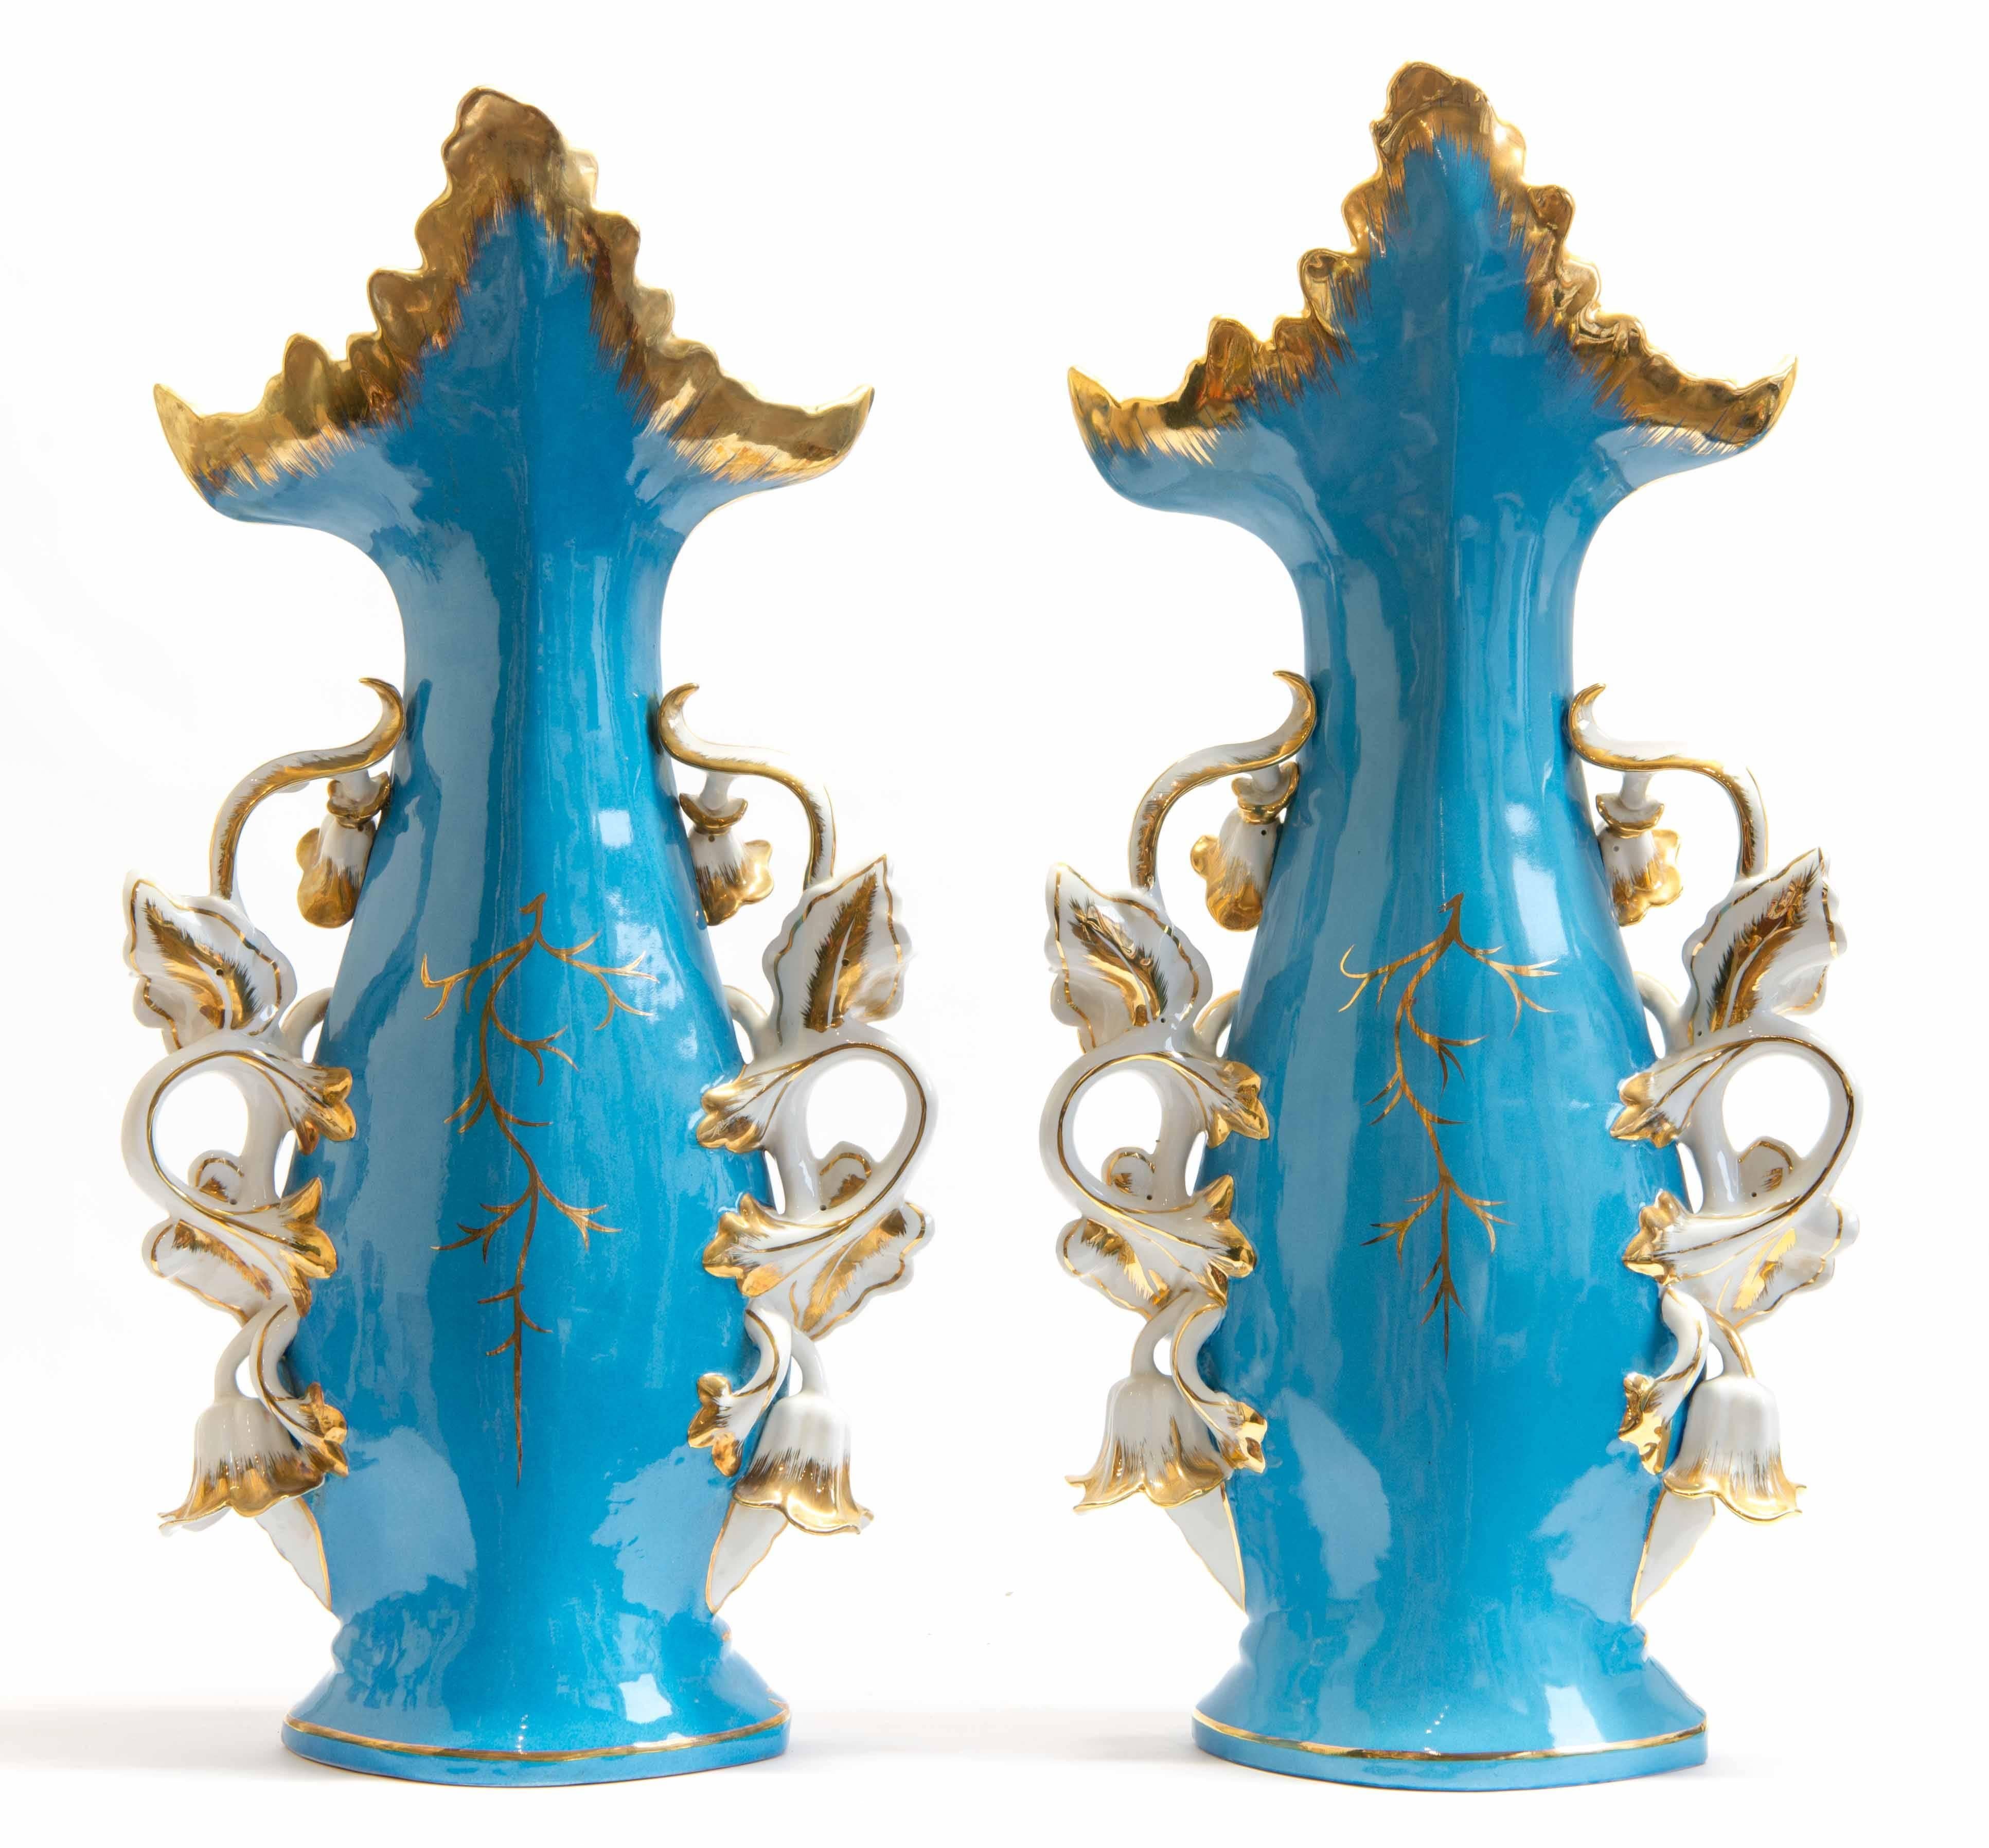 Very nice pair of porcelain vases, signed Meissen. 

Polychrome decor with figurines. 
Gilt, white and blue vase. 
Mint condition. No damage at all. 

Made circa 1960 in Germany.
     